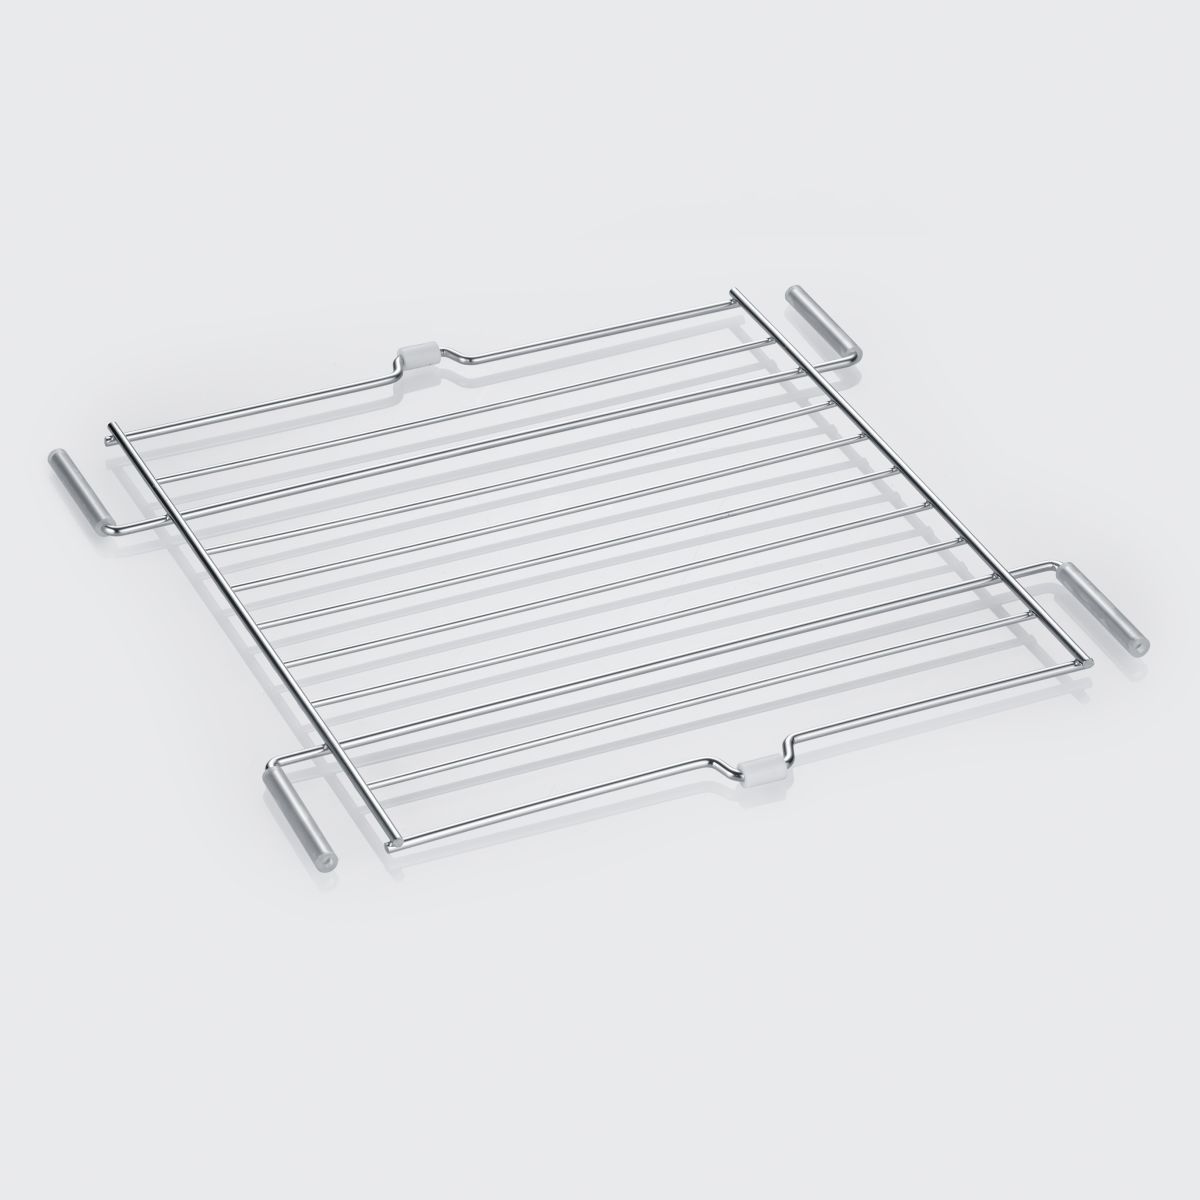 Mikrowelle m.Grill MW 7763 sw